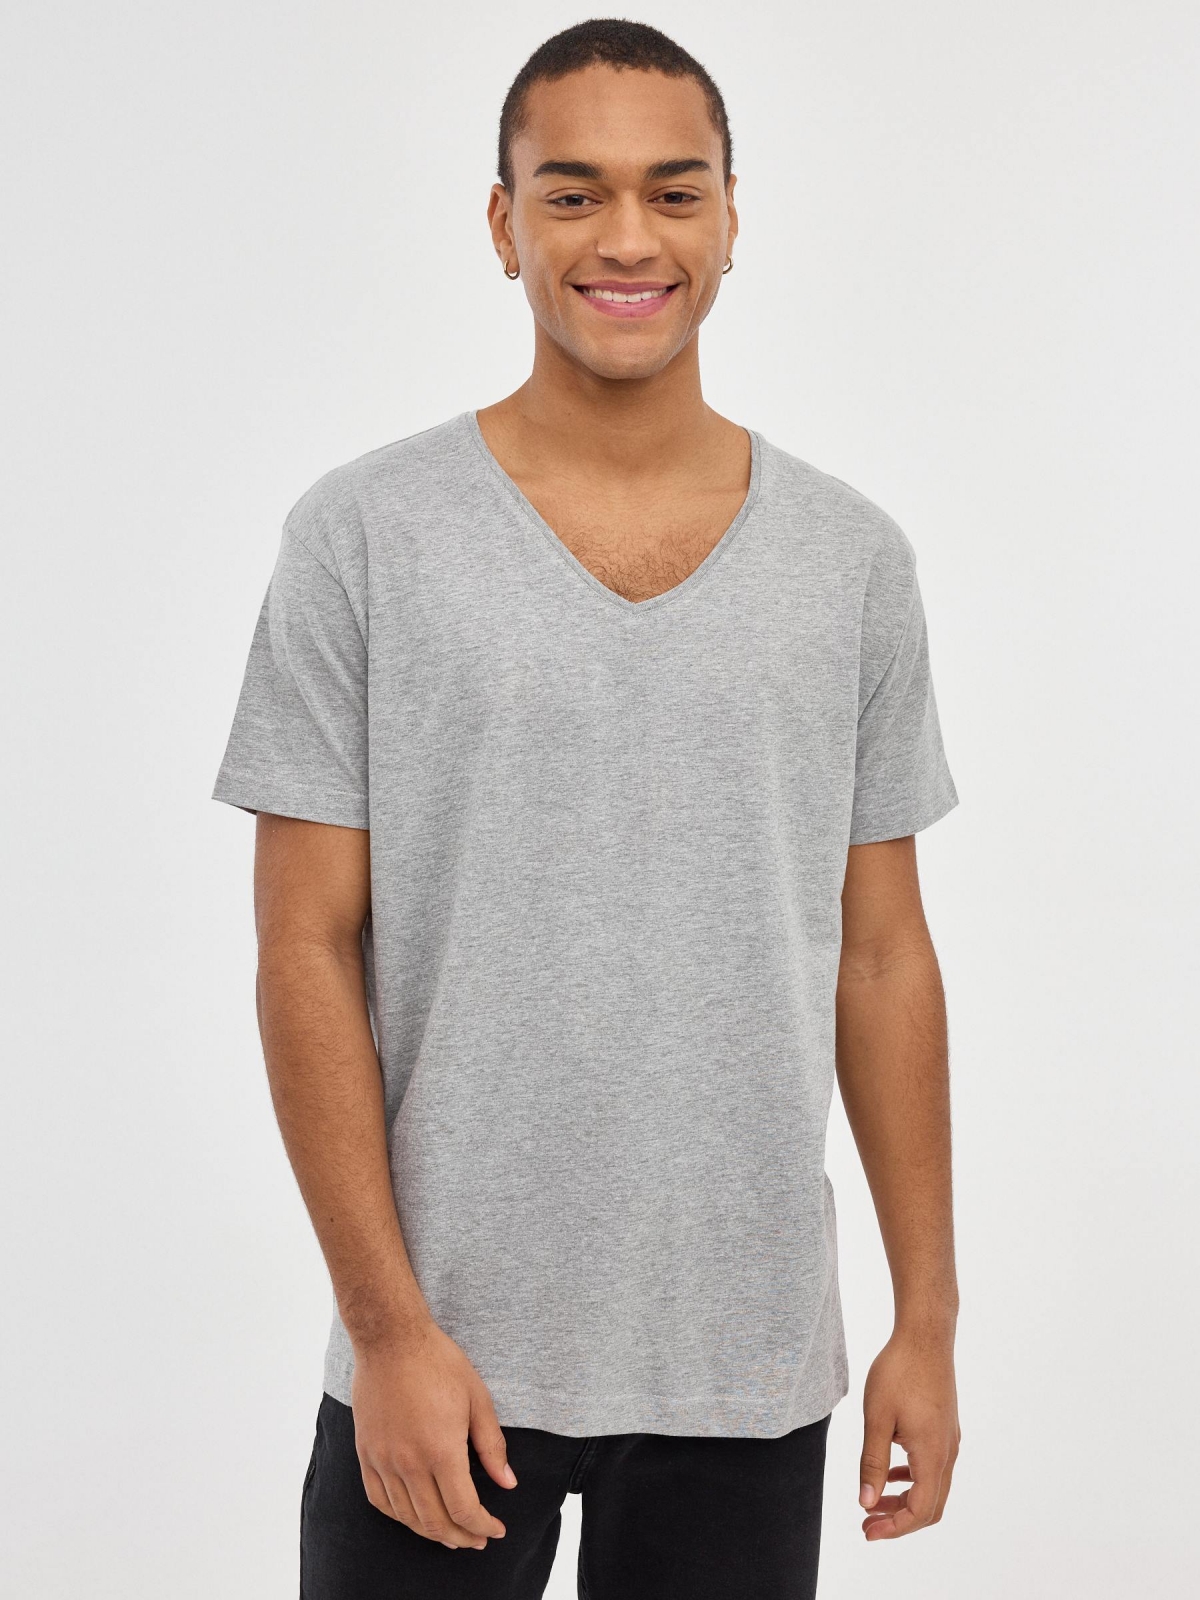 Basic V-neck T-shirt grey middle front view